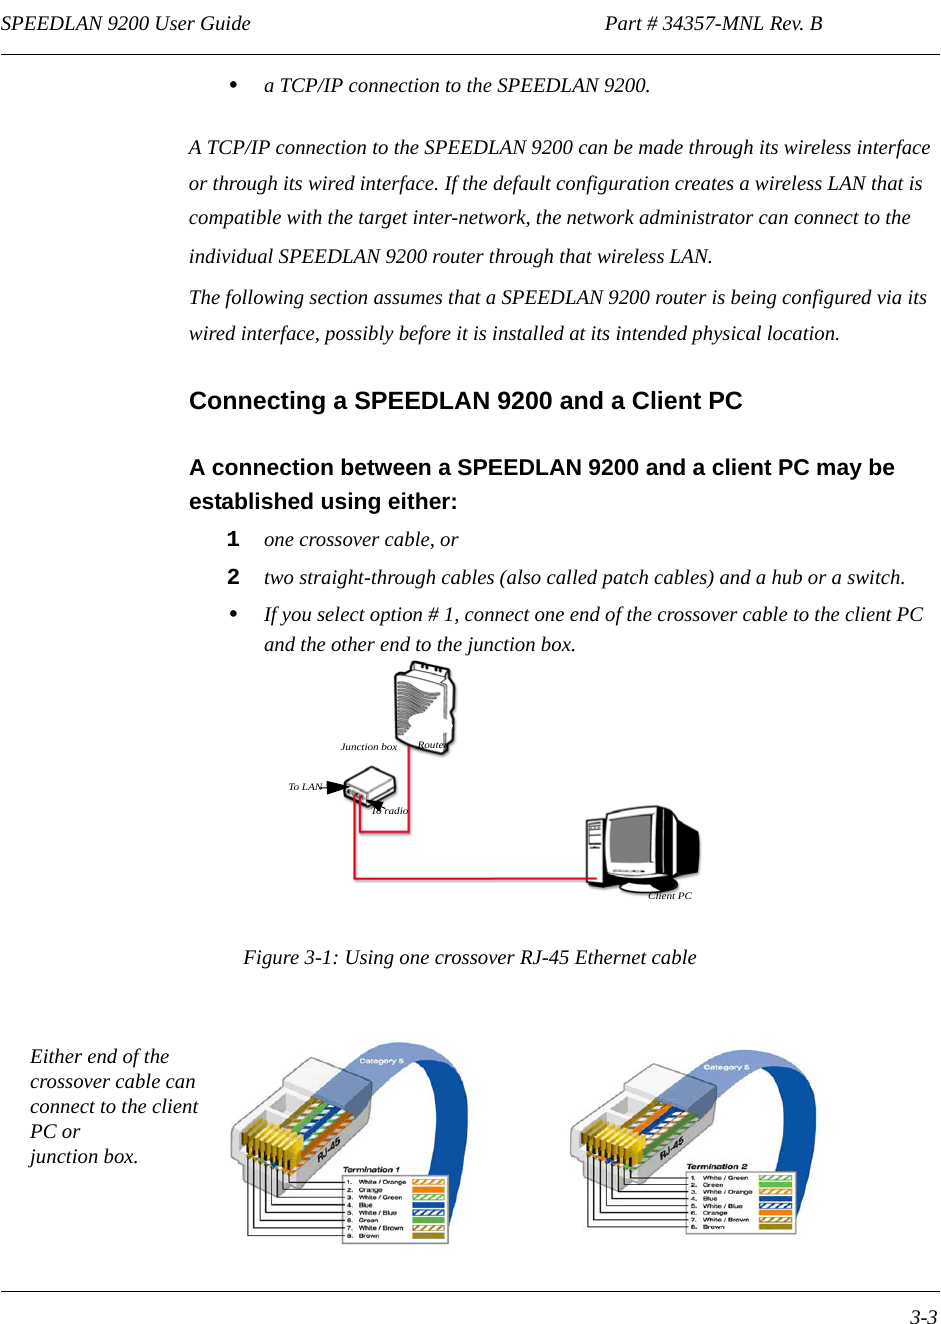 SPEEDLAN 9200 User Guide                                                                    Part # 34357-MNL Rev. B      3-3                                                                                                                                                              •a TCP/IP connection to the SPEEDLAN 9200.A TCP/IP connection to the SPEEDLAN 9200 can be made through its wireless interface or through its wired interface. If the default configuration creates a wireless LAN that is compatible with the target inter-network, the network administrator can connect to the individual SPEEDLAN 9200 router through that wireless LAN. The following section assumes that a SPEEDLAN 9200 router is being configured via its wired interface, possibly before it is installed at its intended physical location.Connecting a SPEEDLAN 9200 and a Client PCA connection between a SPEEDLAN 9200 and a client PC may be established using either:1one crossover cable, or  2two straight-through cables (also called patch cables) and a hub or a switch.•If you select option # 1, connect one end of the crossover cable to the client PC and the other end to the junction box.Figure 3-1: Using one crossover RJ-45 Ethernet cableRouterJunction boxClient PCTo rad ioTo LANEither end of the crossover cable can connect to the client PC or junction box.